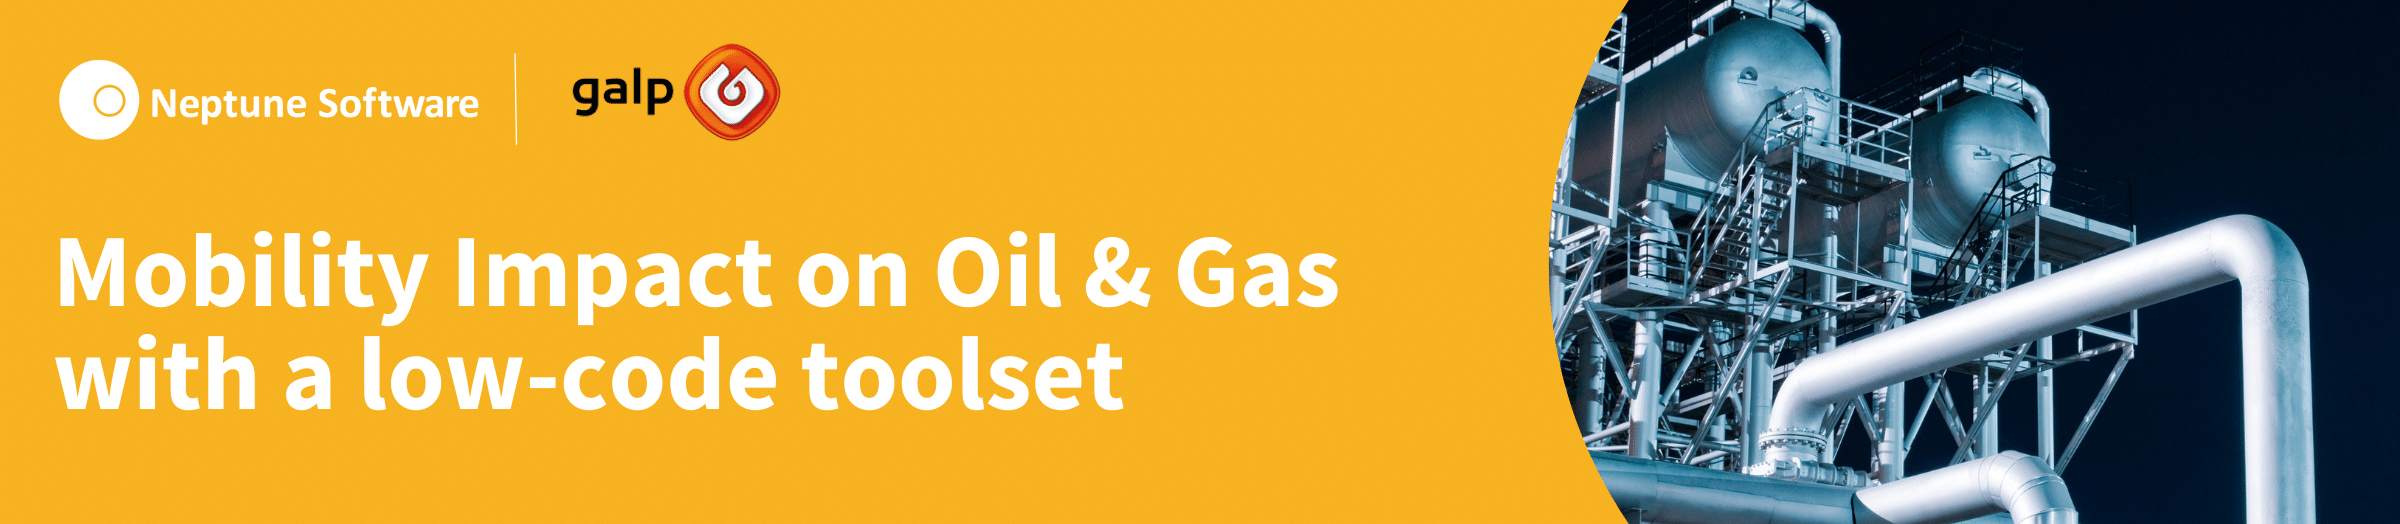 Mobility Oil & Gas 